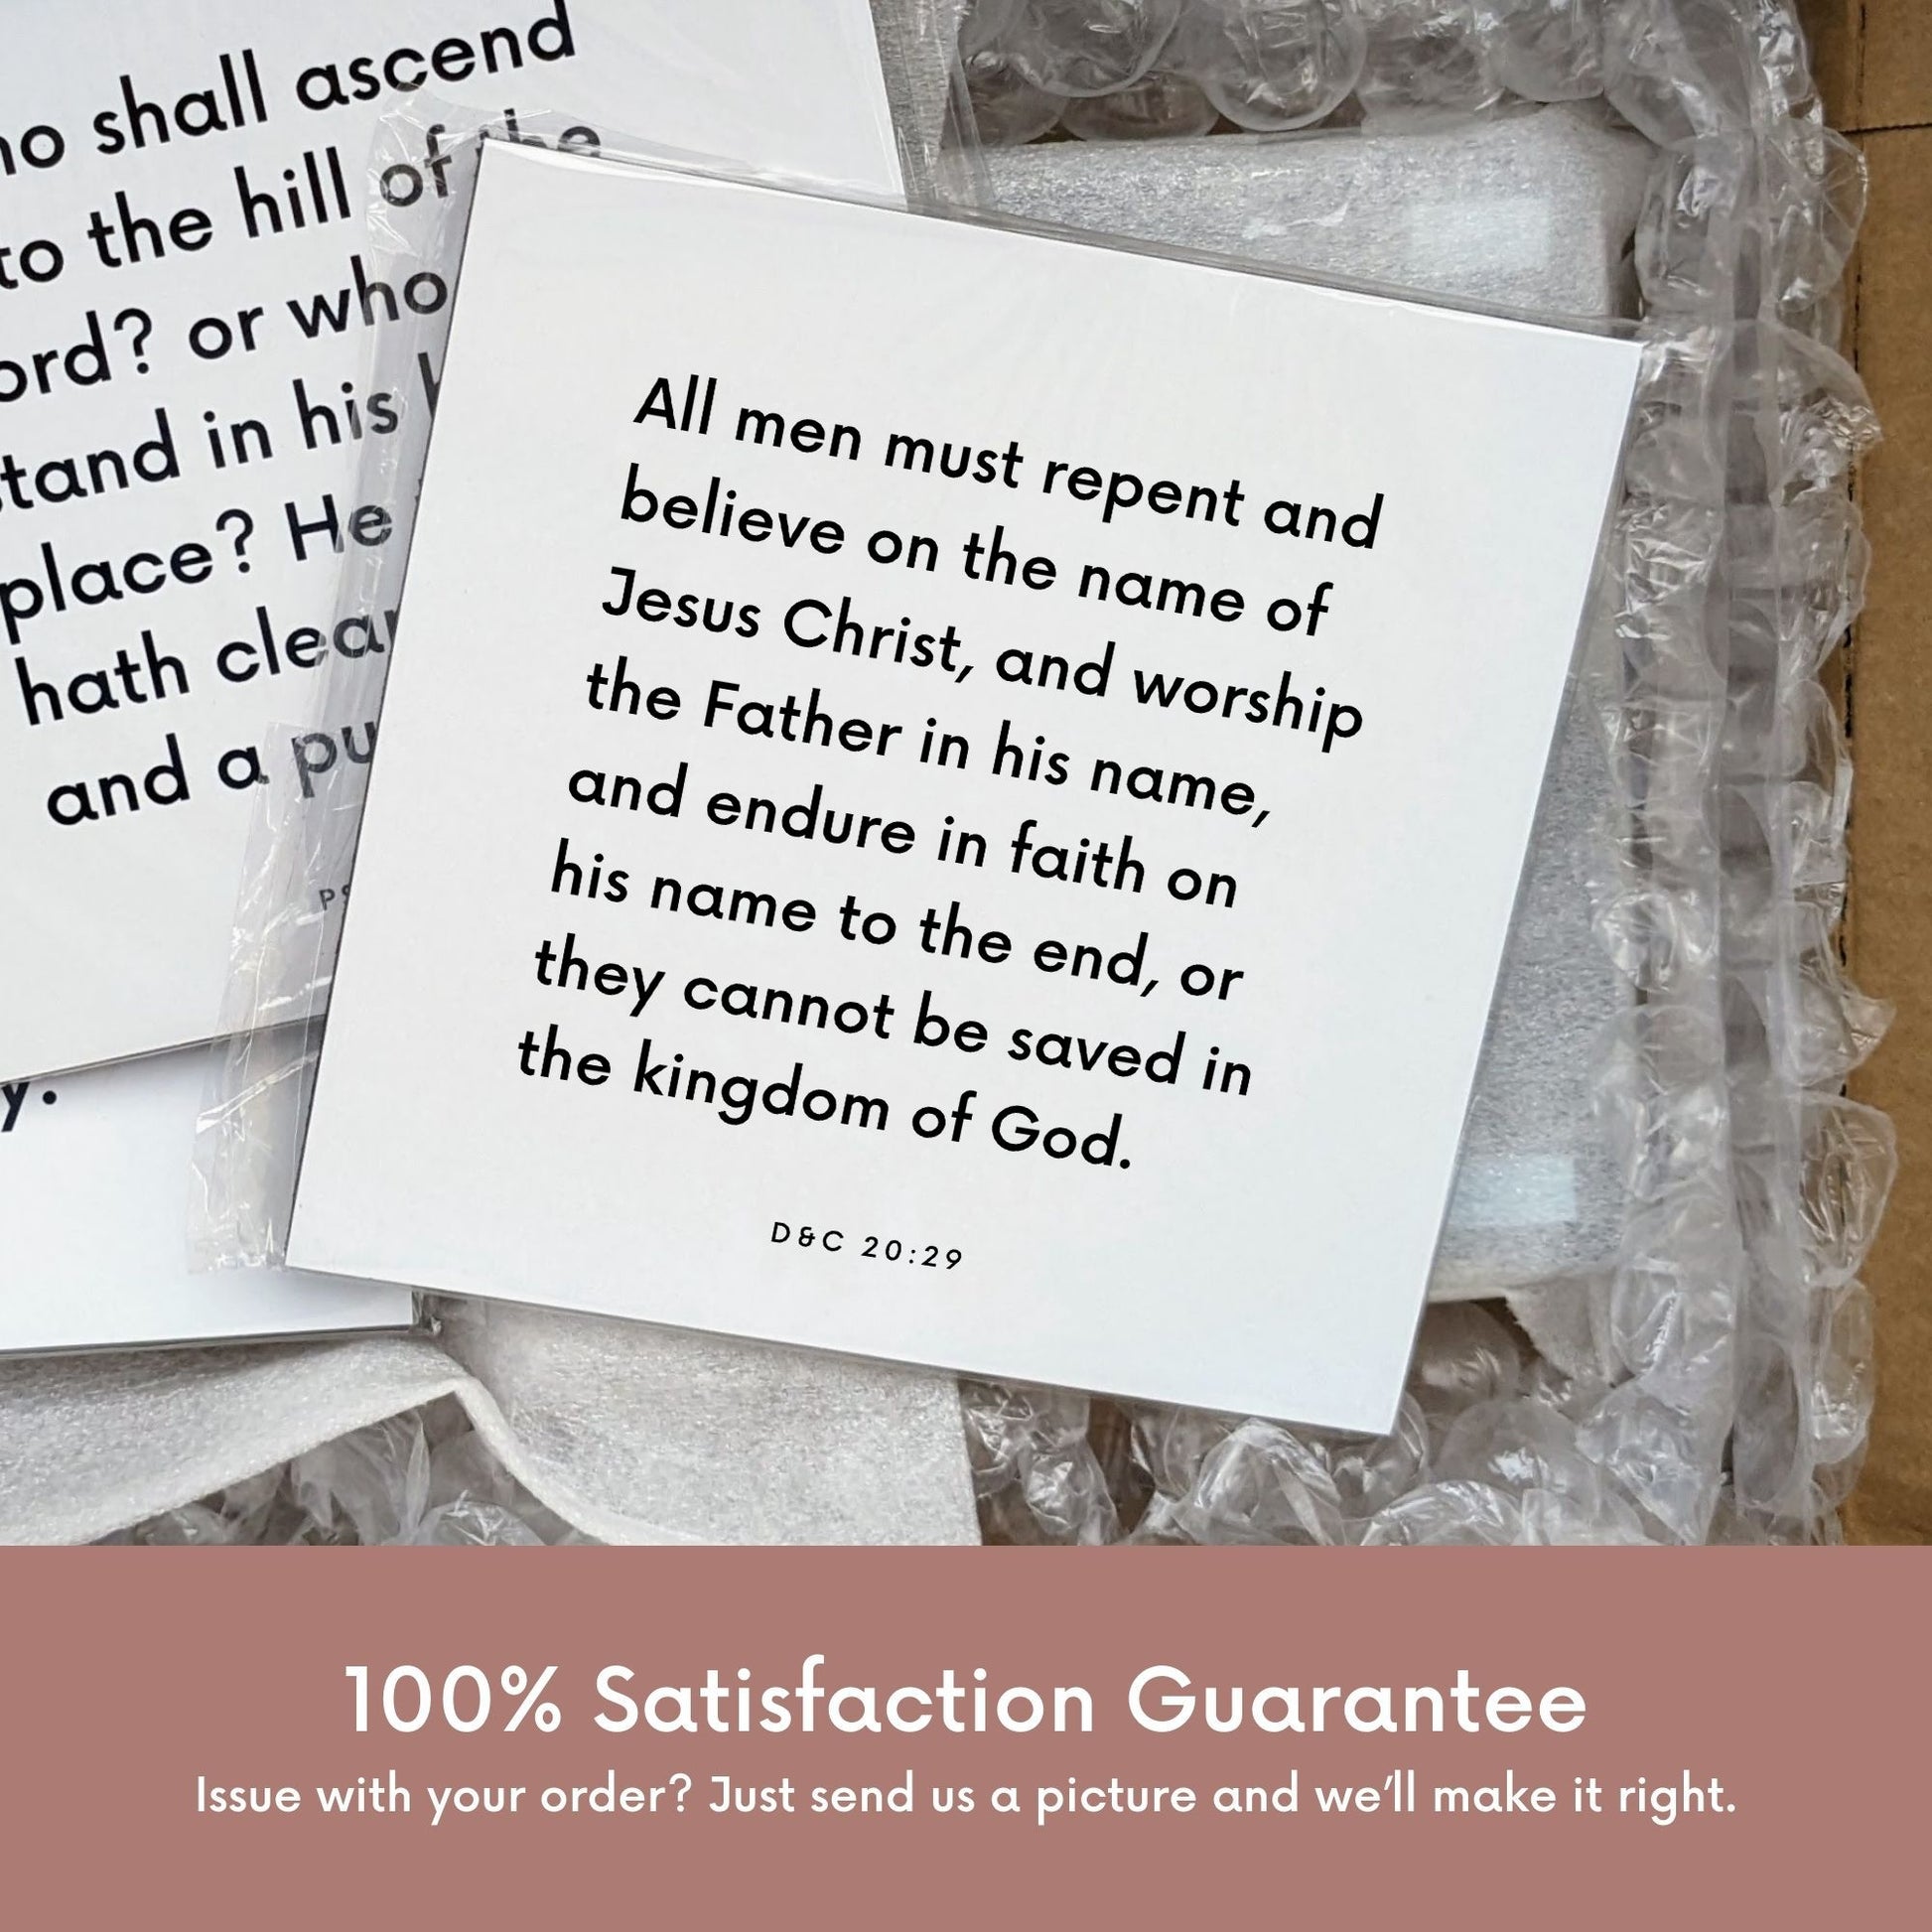 Shipping materials for scripture tile of D&C 20:29 - "All men must repent and believe on the name of Jesus Christ"